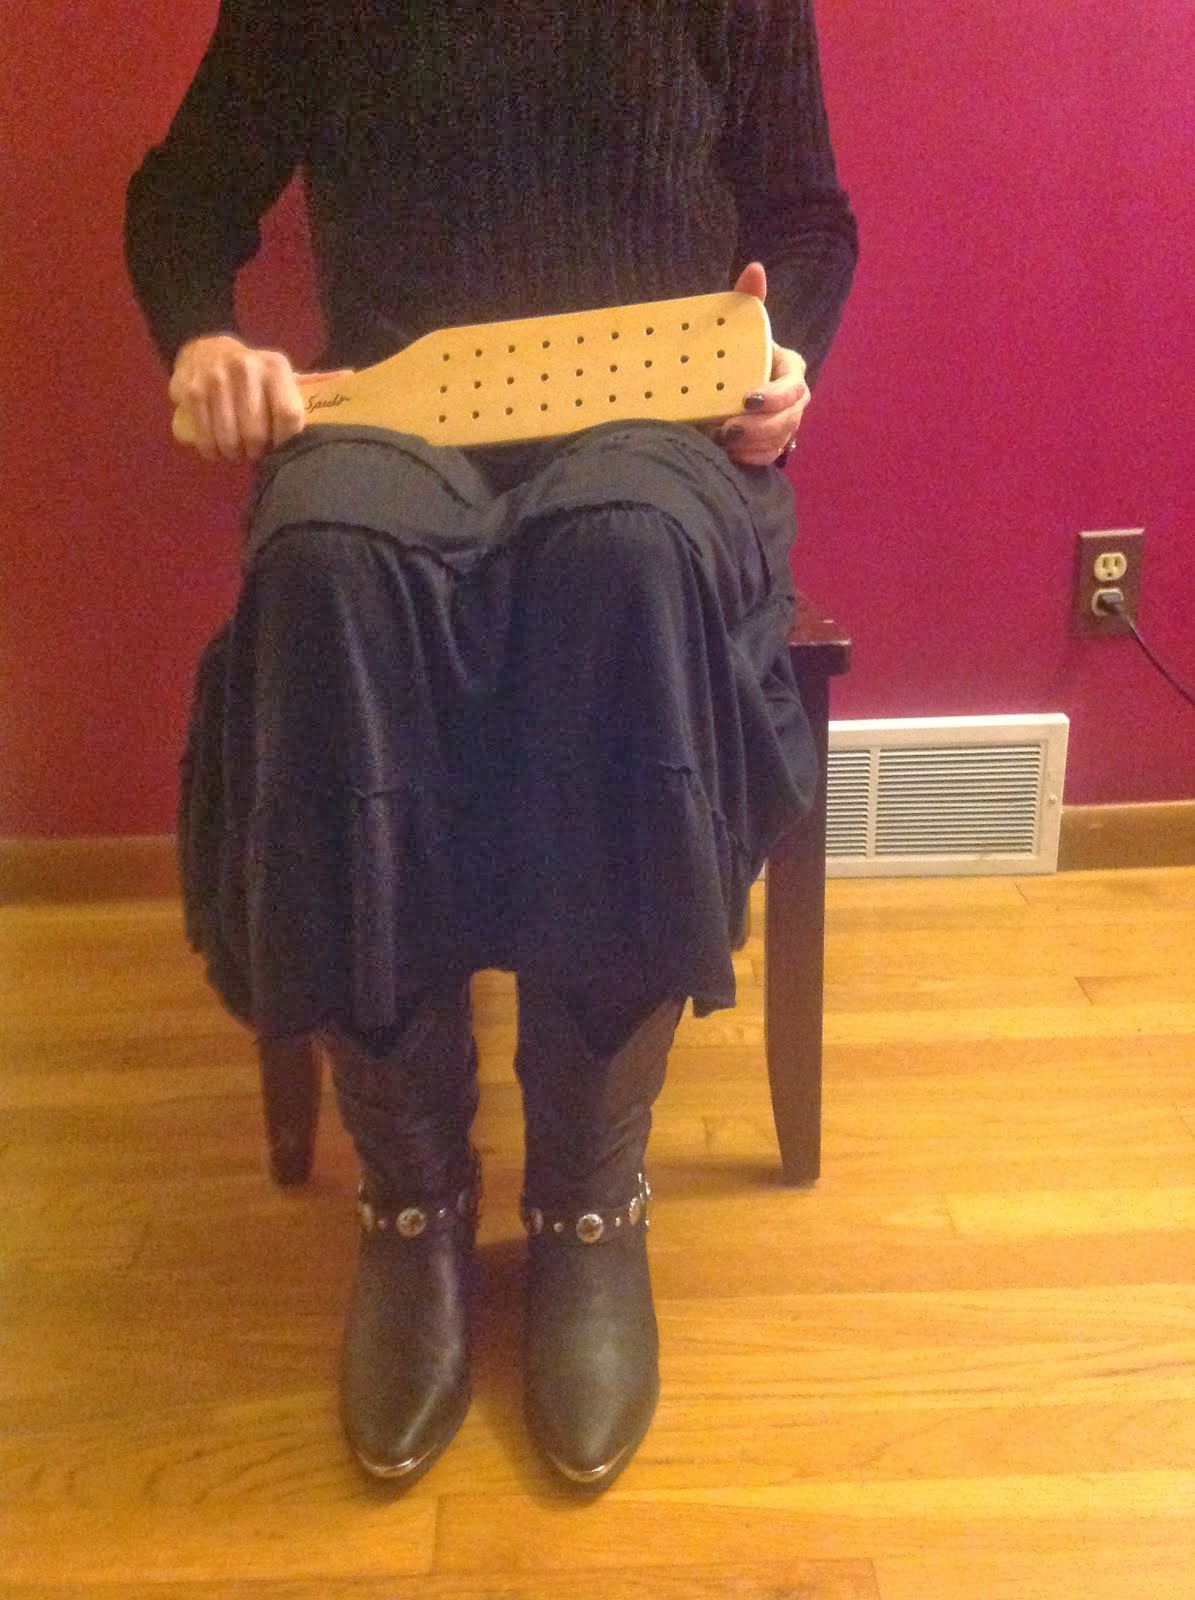 My Goddess/Wife with the Spencer paddle!!!